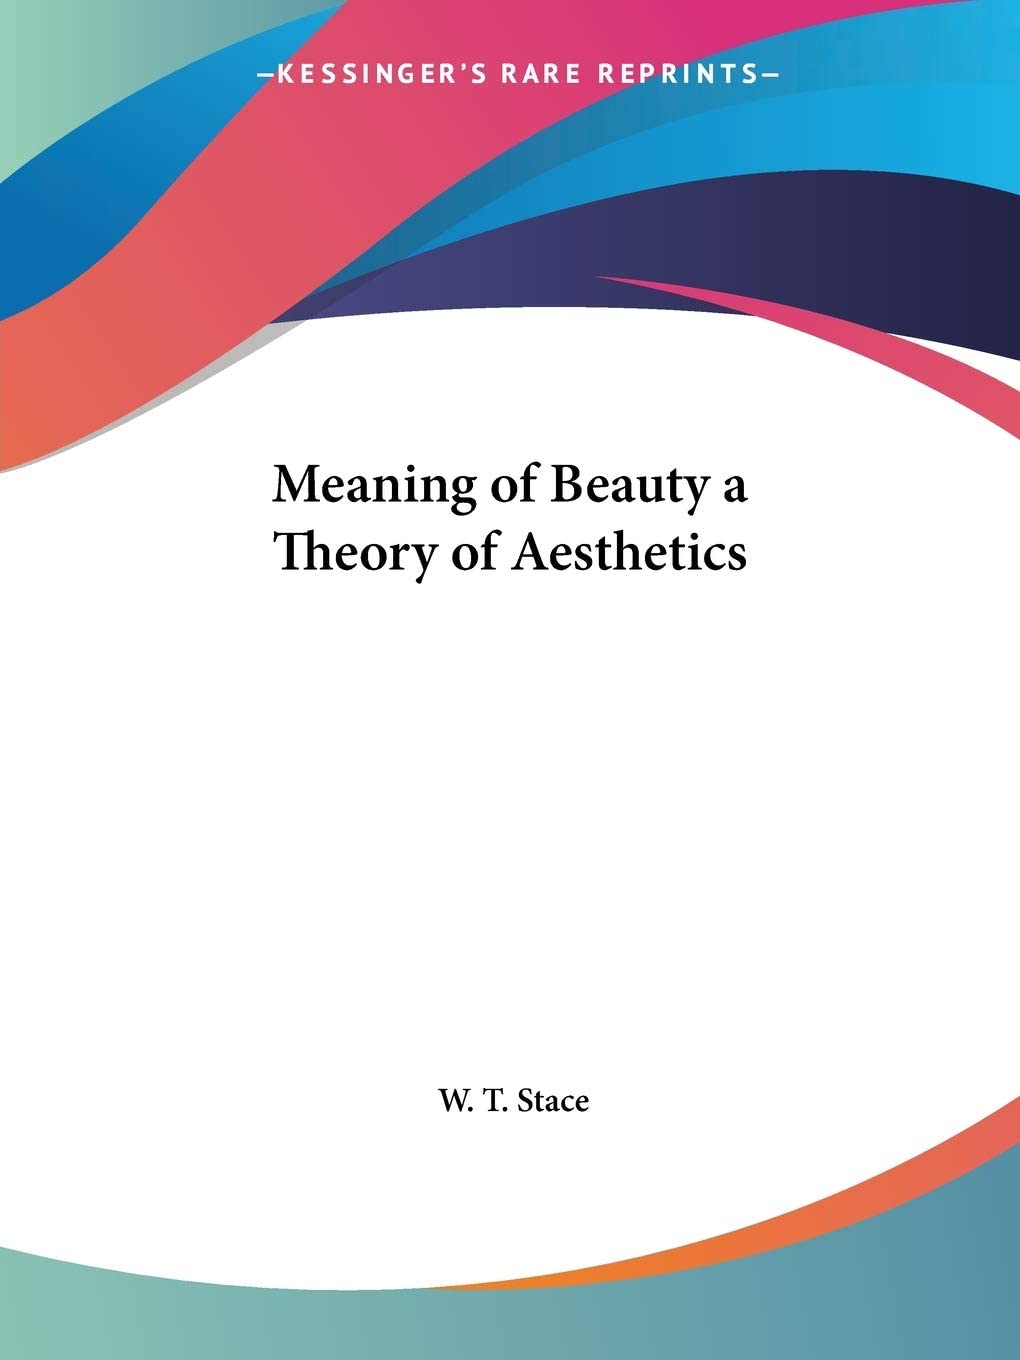 Meaning of Beauty a Theory of Aesthetics